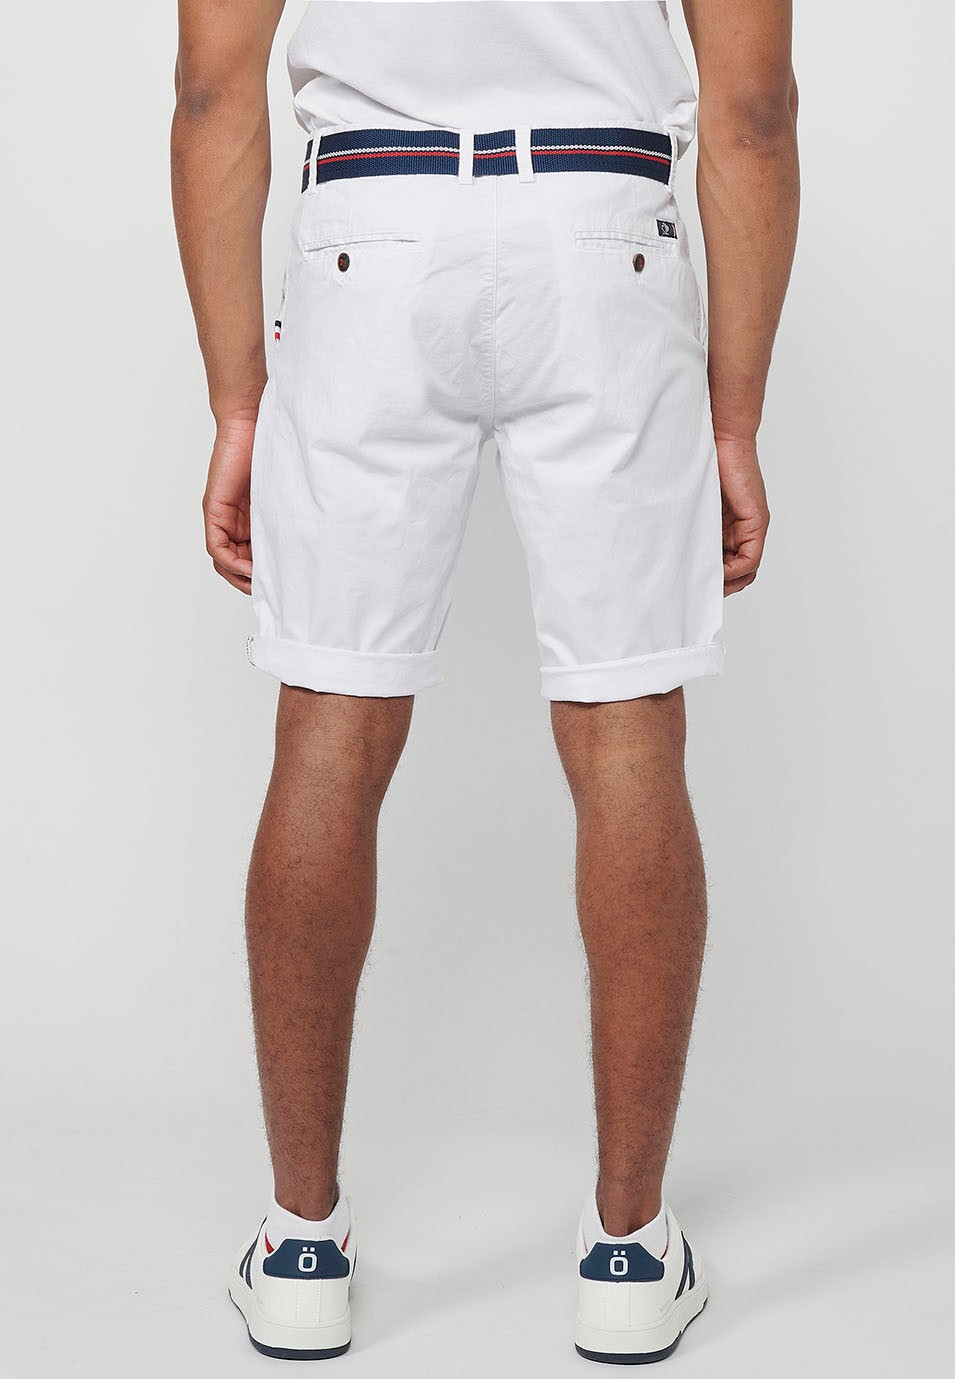 Shorts with a turn-up finish with front closure with zipper and button and belt in White for Men 3